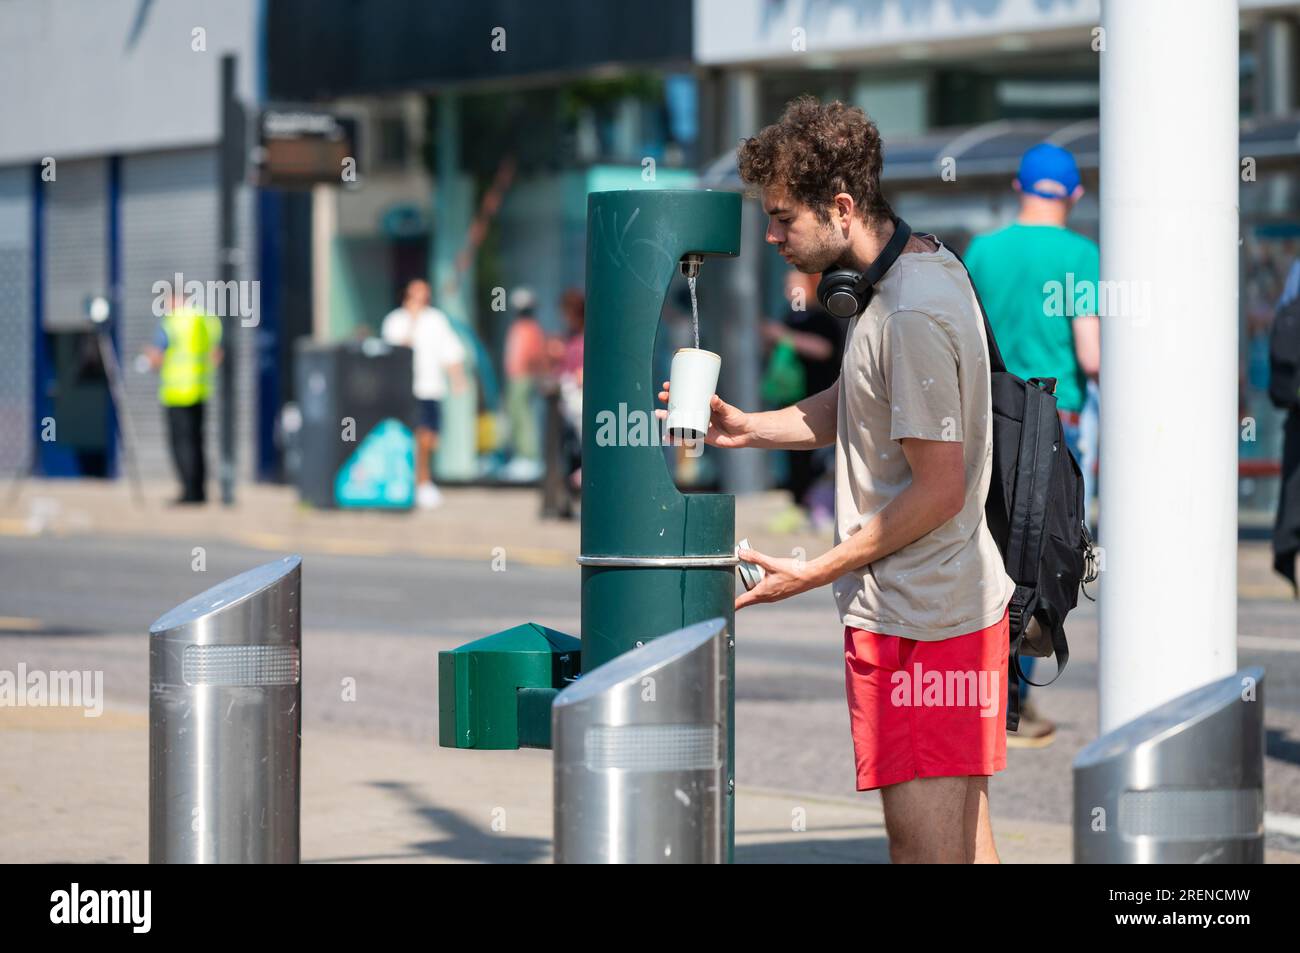 https://c8.alamy.com/comp/2RENCMW/young-man-filling-a-cup-with-water-from-a-public-water-dispenser-or-drinking-water-fountain-summer-in-brighton-brighton-hove-england-uk-2RENCMW.jpg